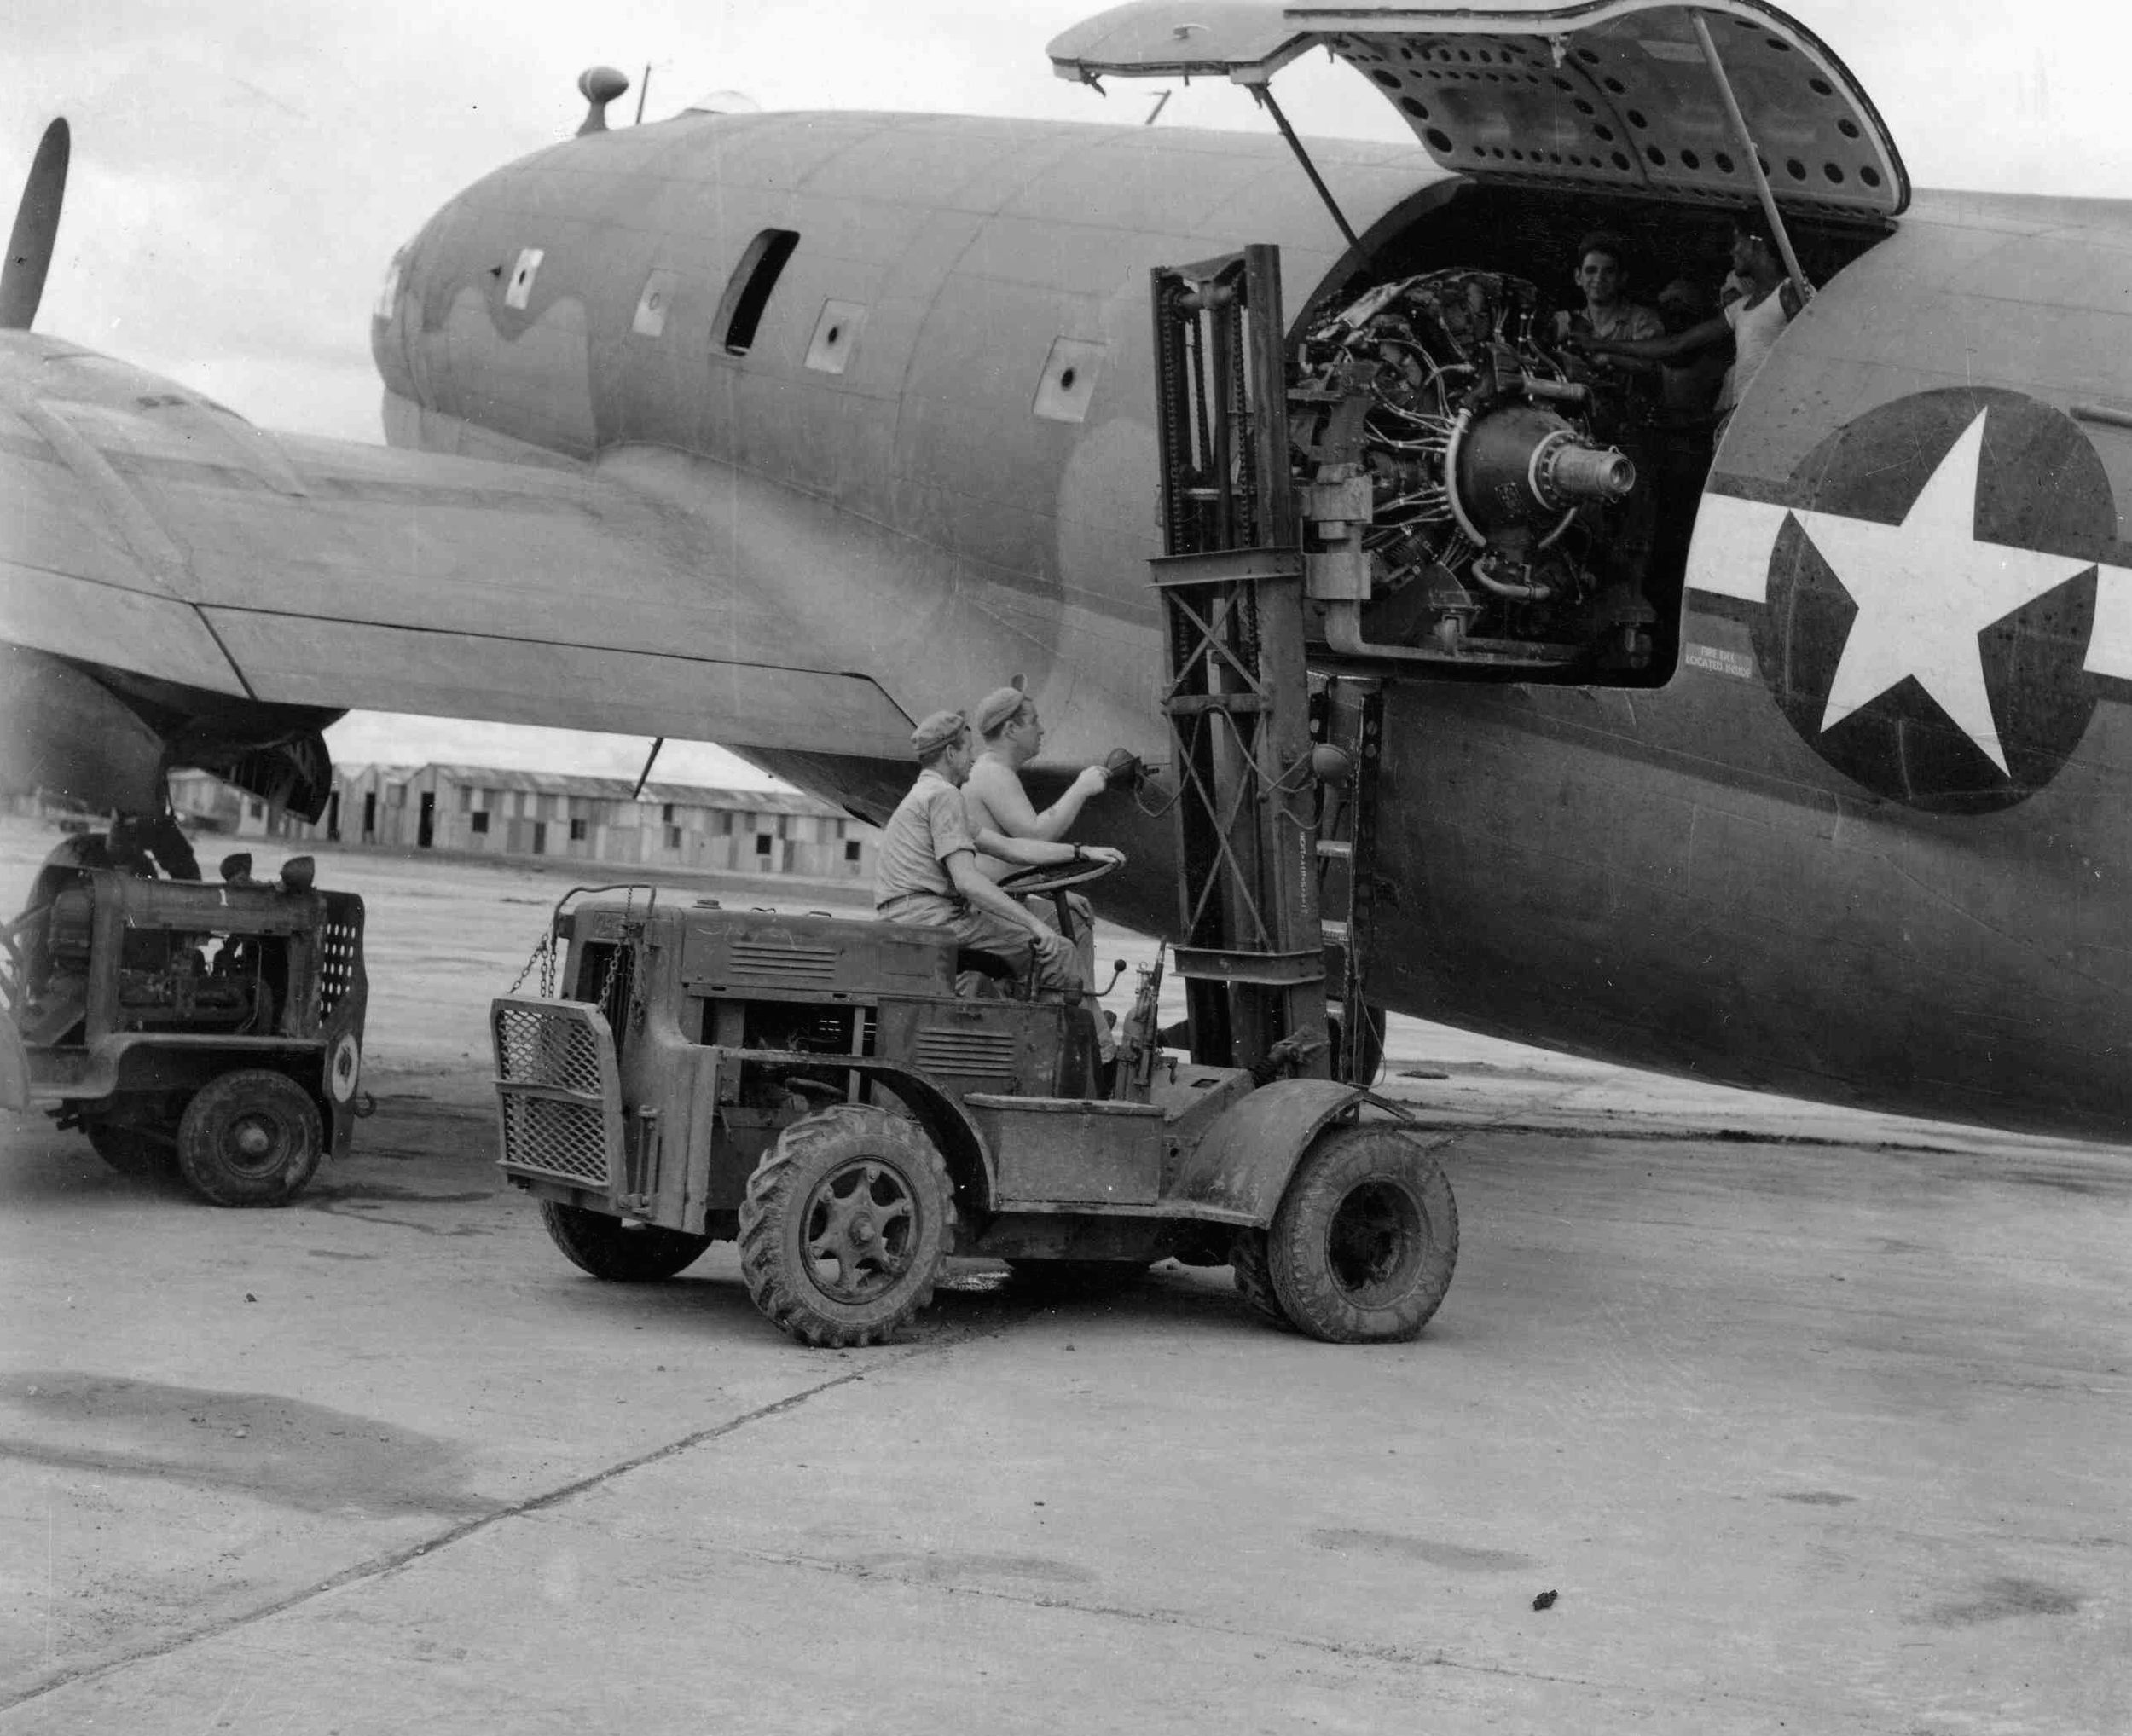 A replacement engine for a Boeing B-29 heavy bomber arrives in China aboard a C-46 transport. B-29 engines and replacement parts were a priority for Hump flights during the effort to mount a bombing campaign against Japan from airfields in China.